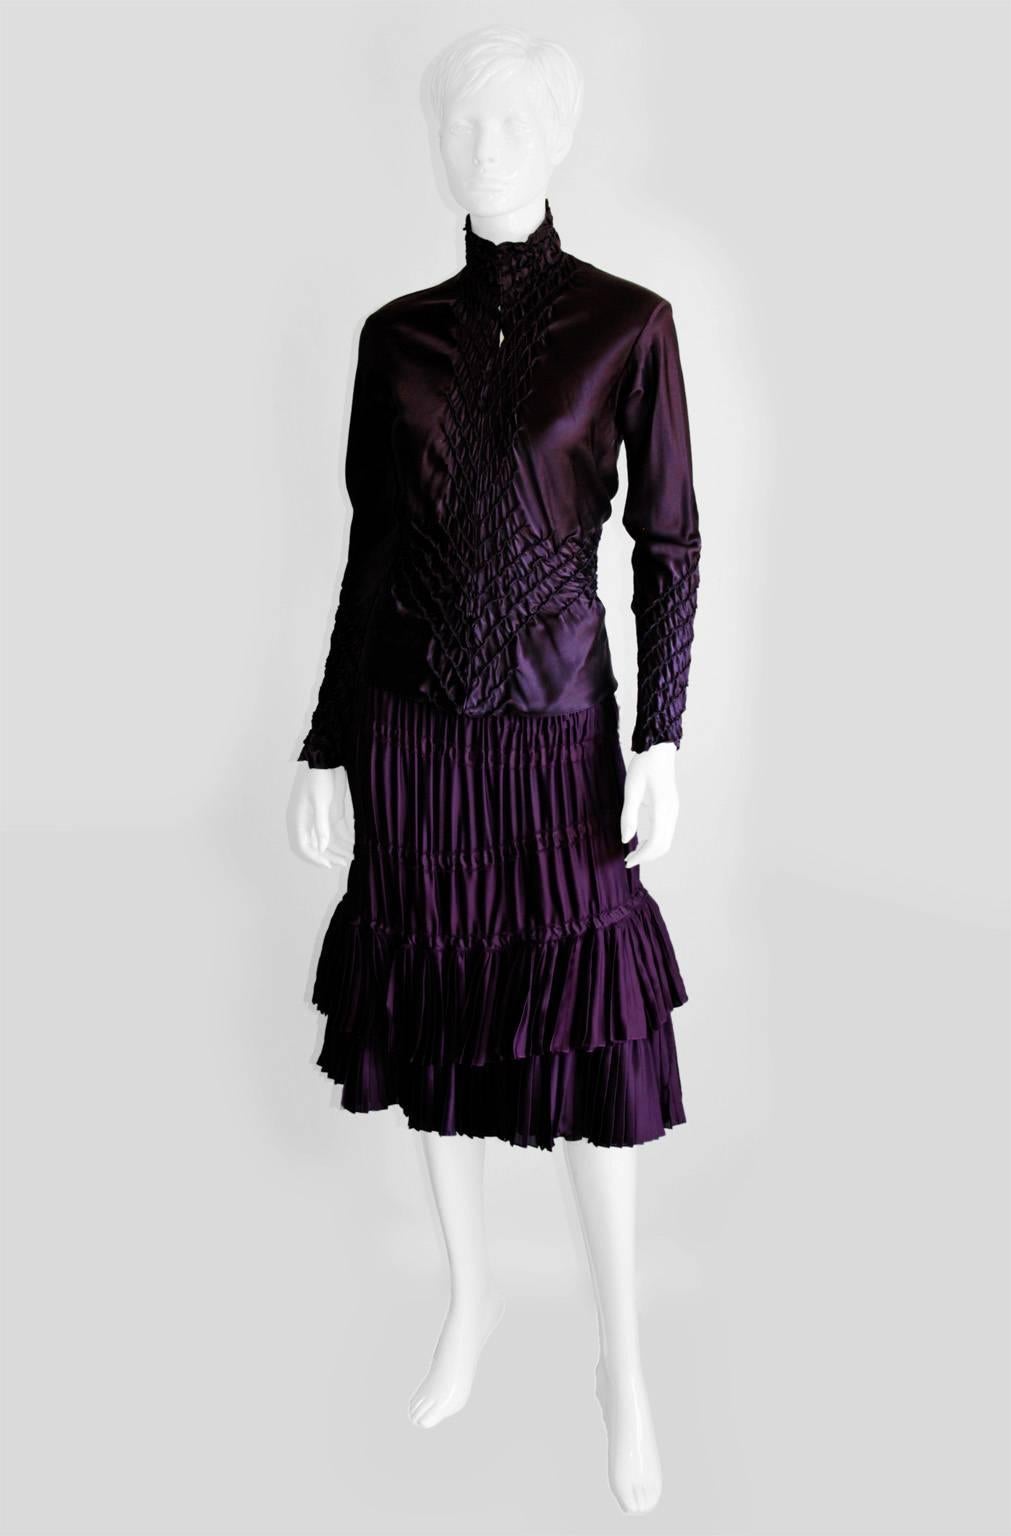 That Amazing Tom Ford YSL Rive Gauche FW 2001 Aubergine Silk Runway Skirt & Blouse!

Who could ever forget Tom Ford's fall/winter 2001 show for Yves Saint Laurent Rive Gauche... with all of those heavenly long, billowy skirts & 